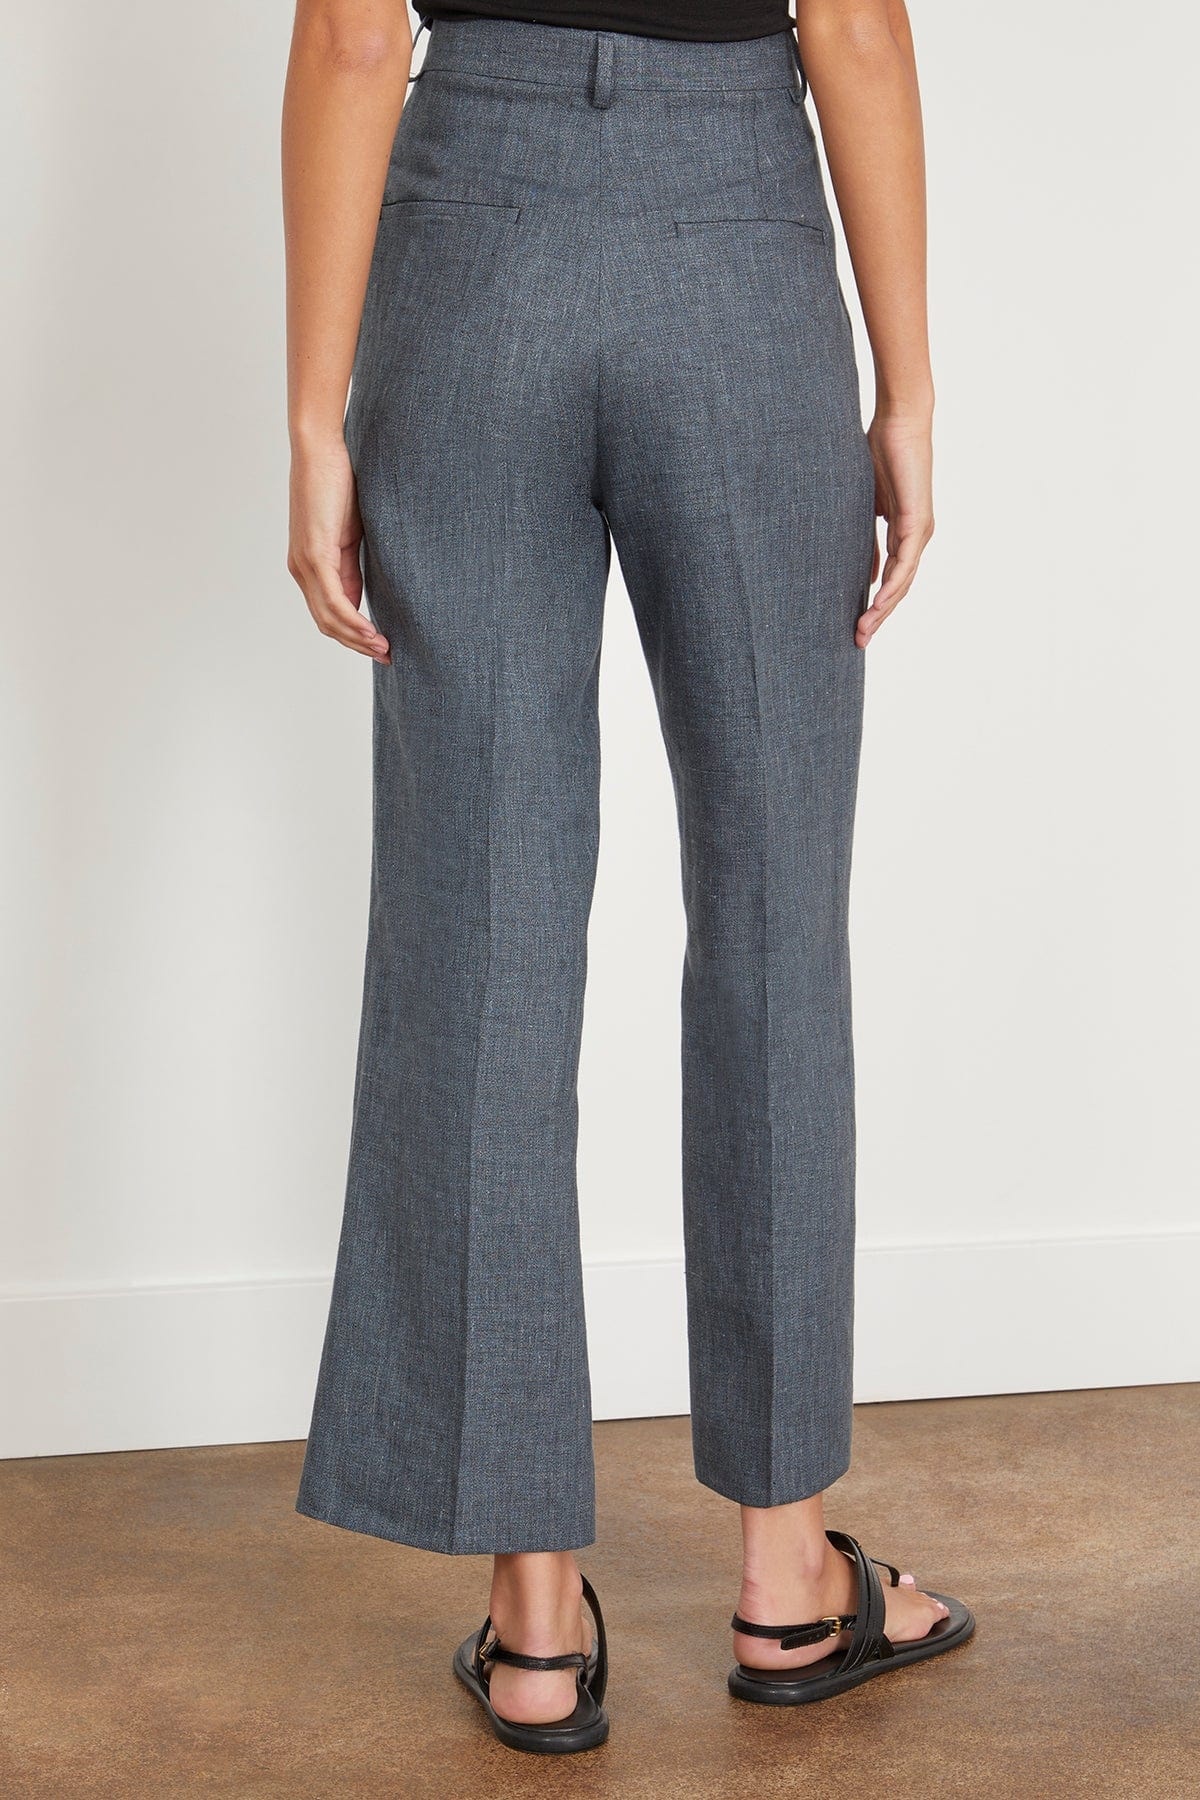 Credo Cropped Bootcut Woven Trouser in Thunder - 4